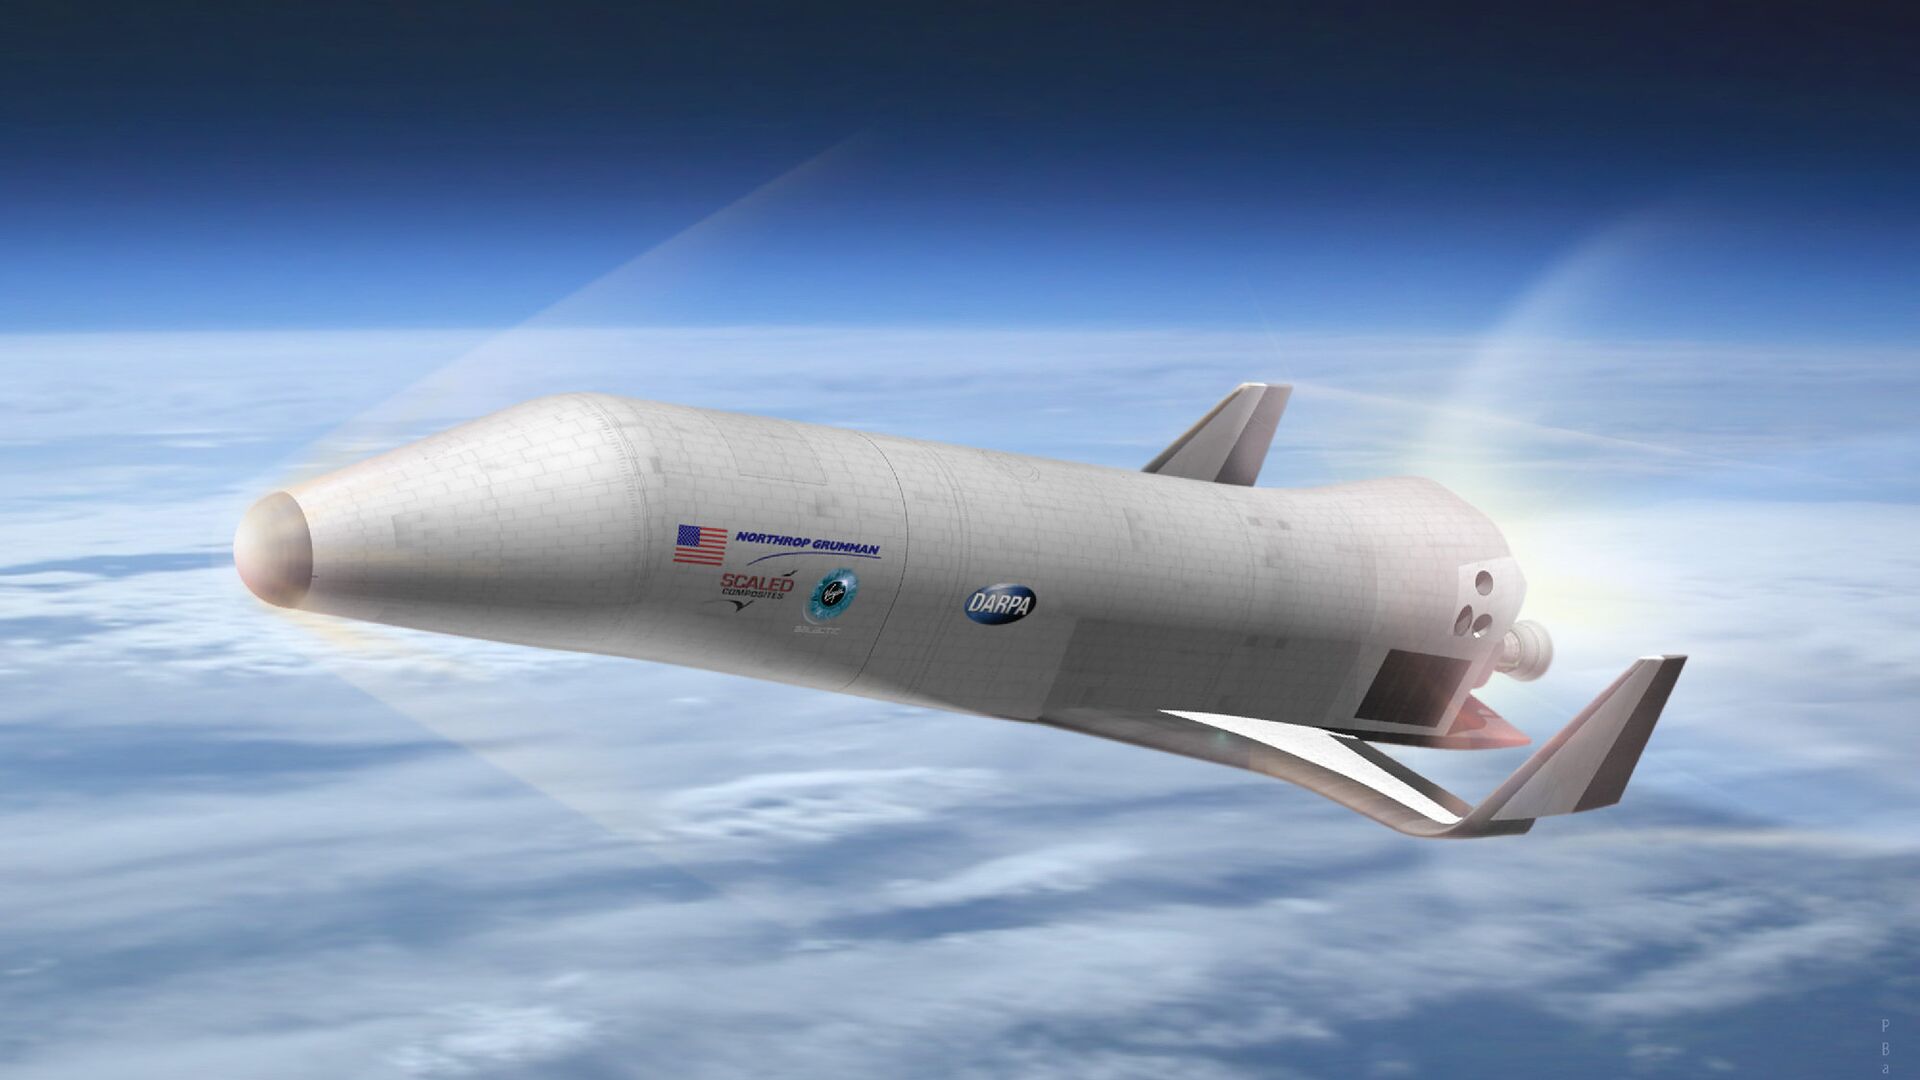 Northrop Grumman Corporation with Scaled Composites and Virgin Galactic's preliminary design for DARPA's Experimental Spaceplane XS-1, shown here in an artist's concept. DARPA ended up going with a Boeing design instead. - Sputnik Moldova-România, 1920, 06.08.2021